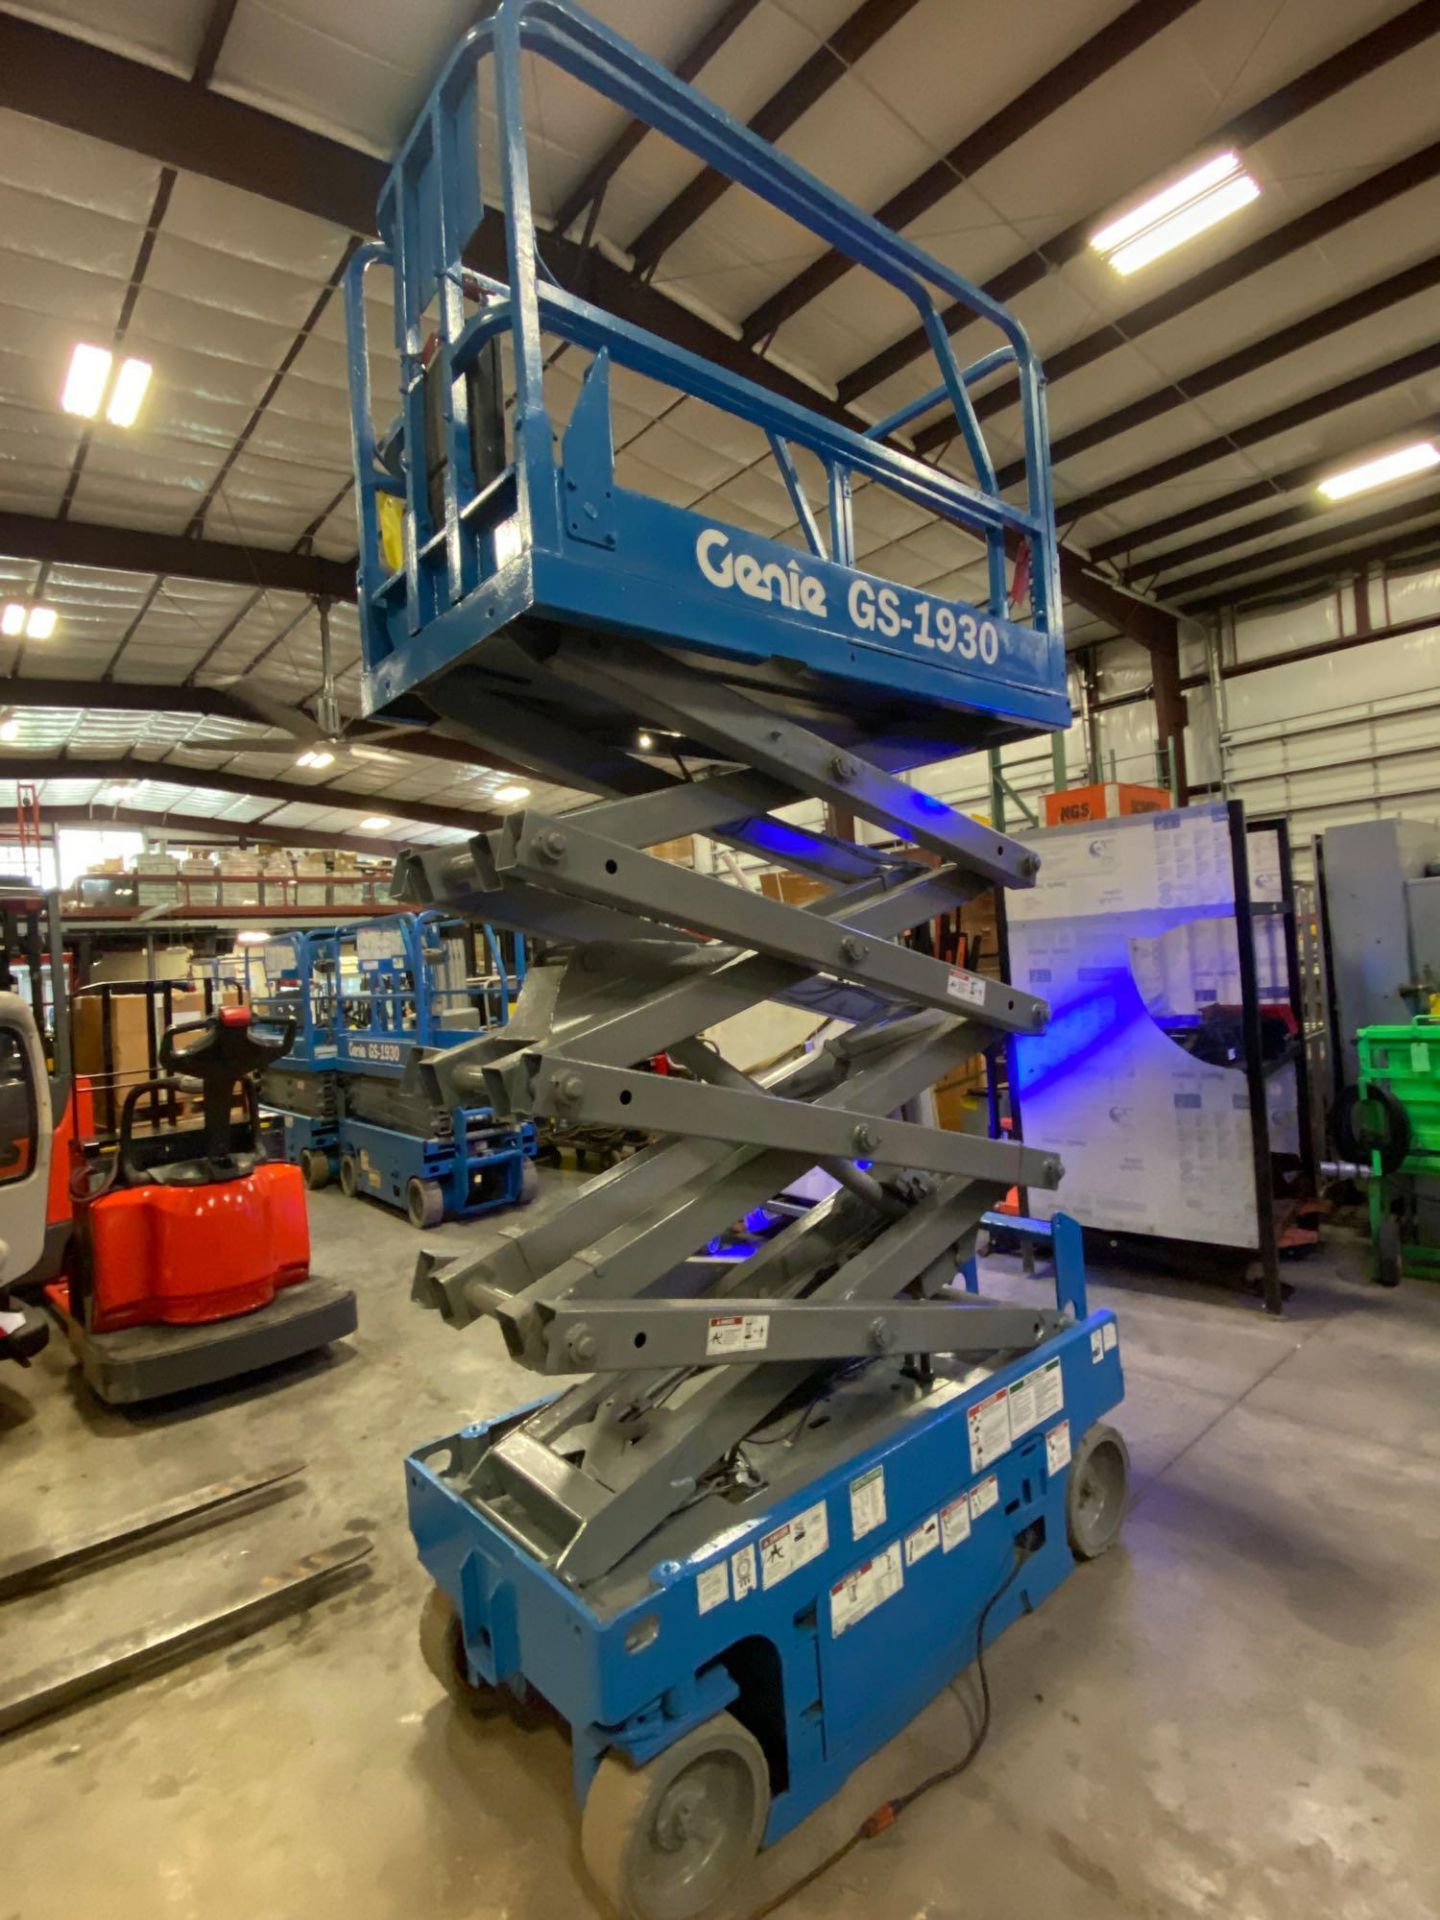 GENIE GS-1930 ELECTRIC SCISSOR LIFT, SELF PROPELLED, 19' PLATFORM HEIGHT, BUILT IN BATTERY CHARGER, - Image 5 of 5